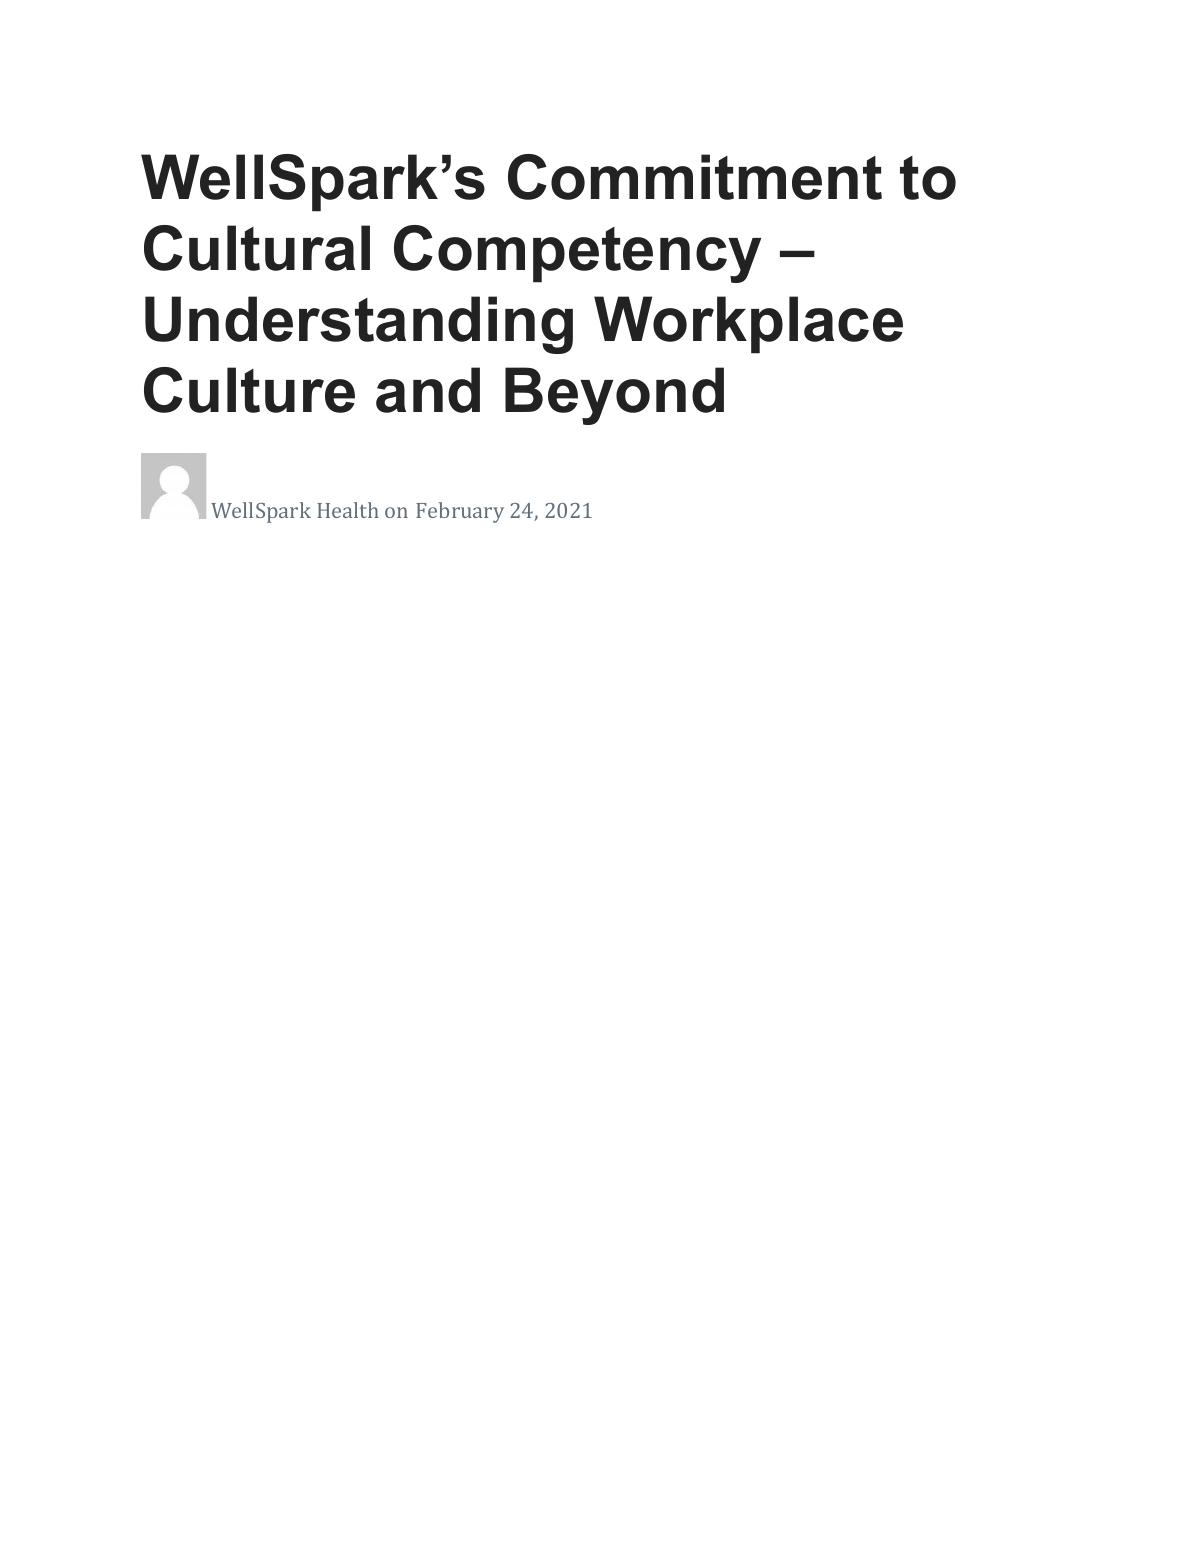 WellSpark’s Commitment to Cultural Competency – Understanding Workplace Culture and Beyond